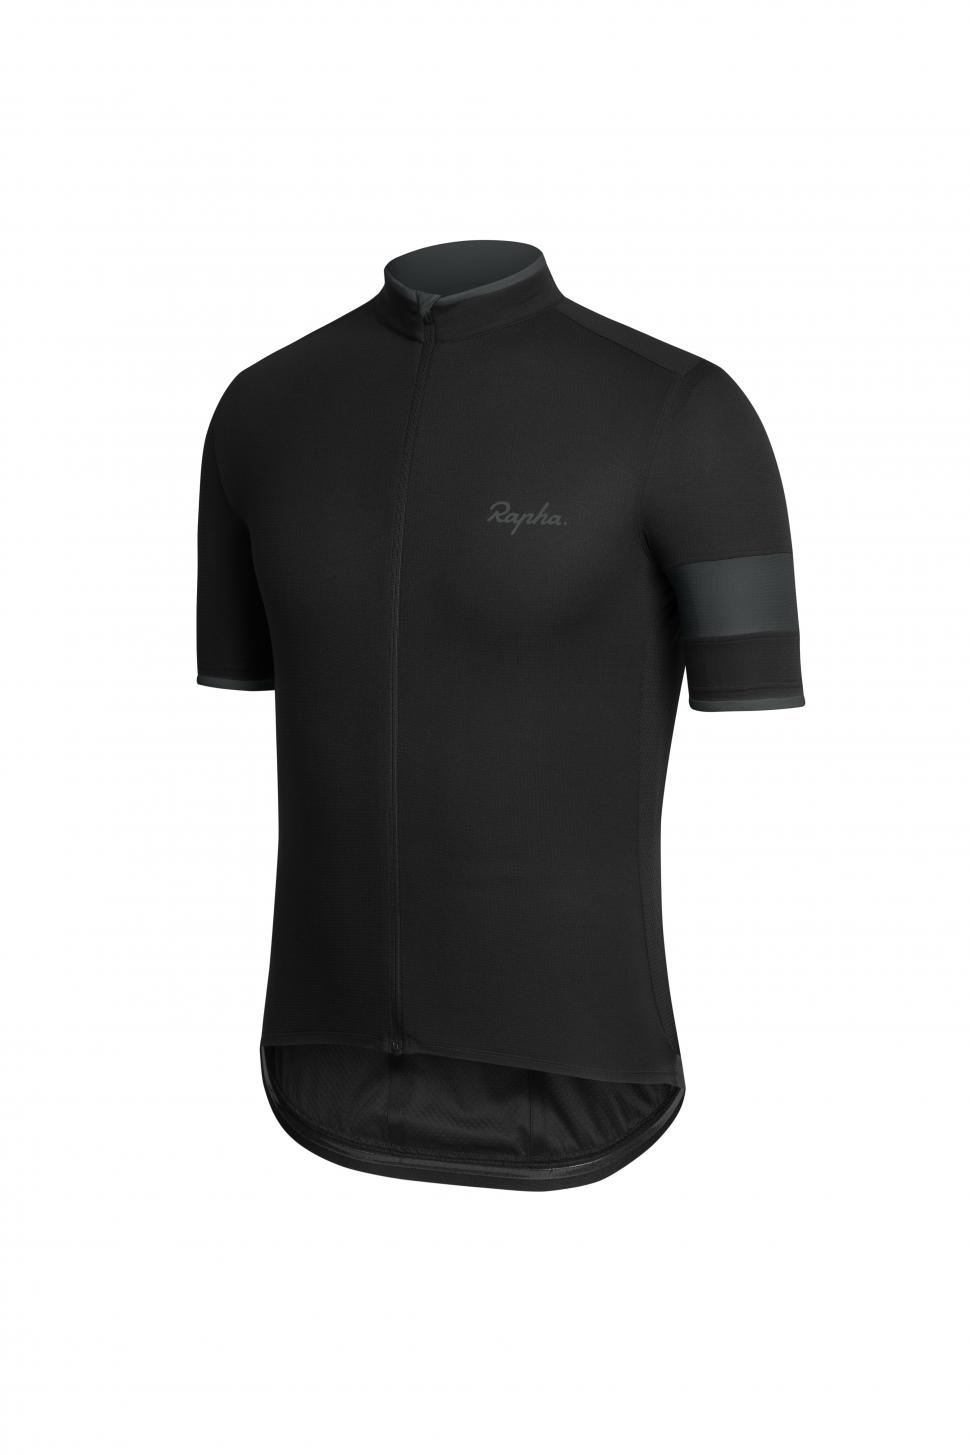 Highlights of the Rapha spring/summer 2016 cycle clothing range | road.cc